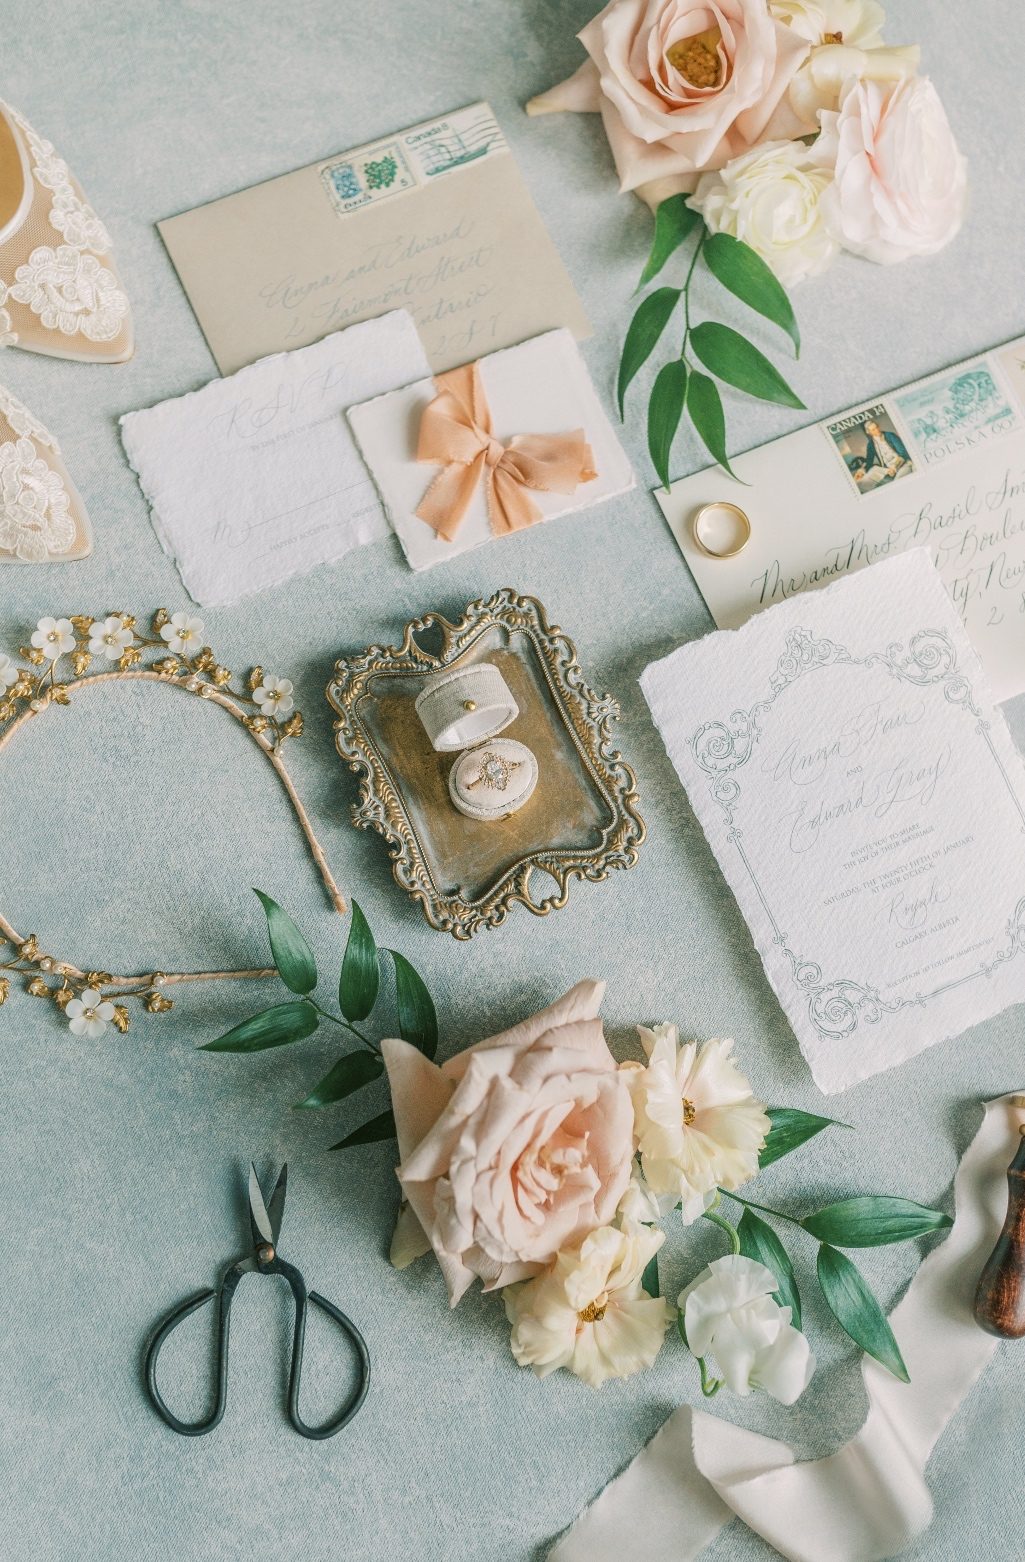 A pretty flat lay shot of assorted details - the wedding invitation, wedding ring on a decorative tray, bridal headband accented by pretty floral clusters